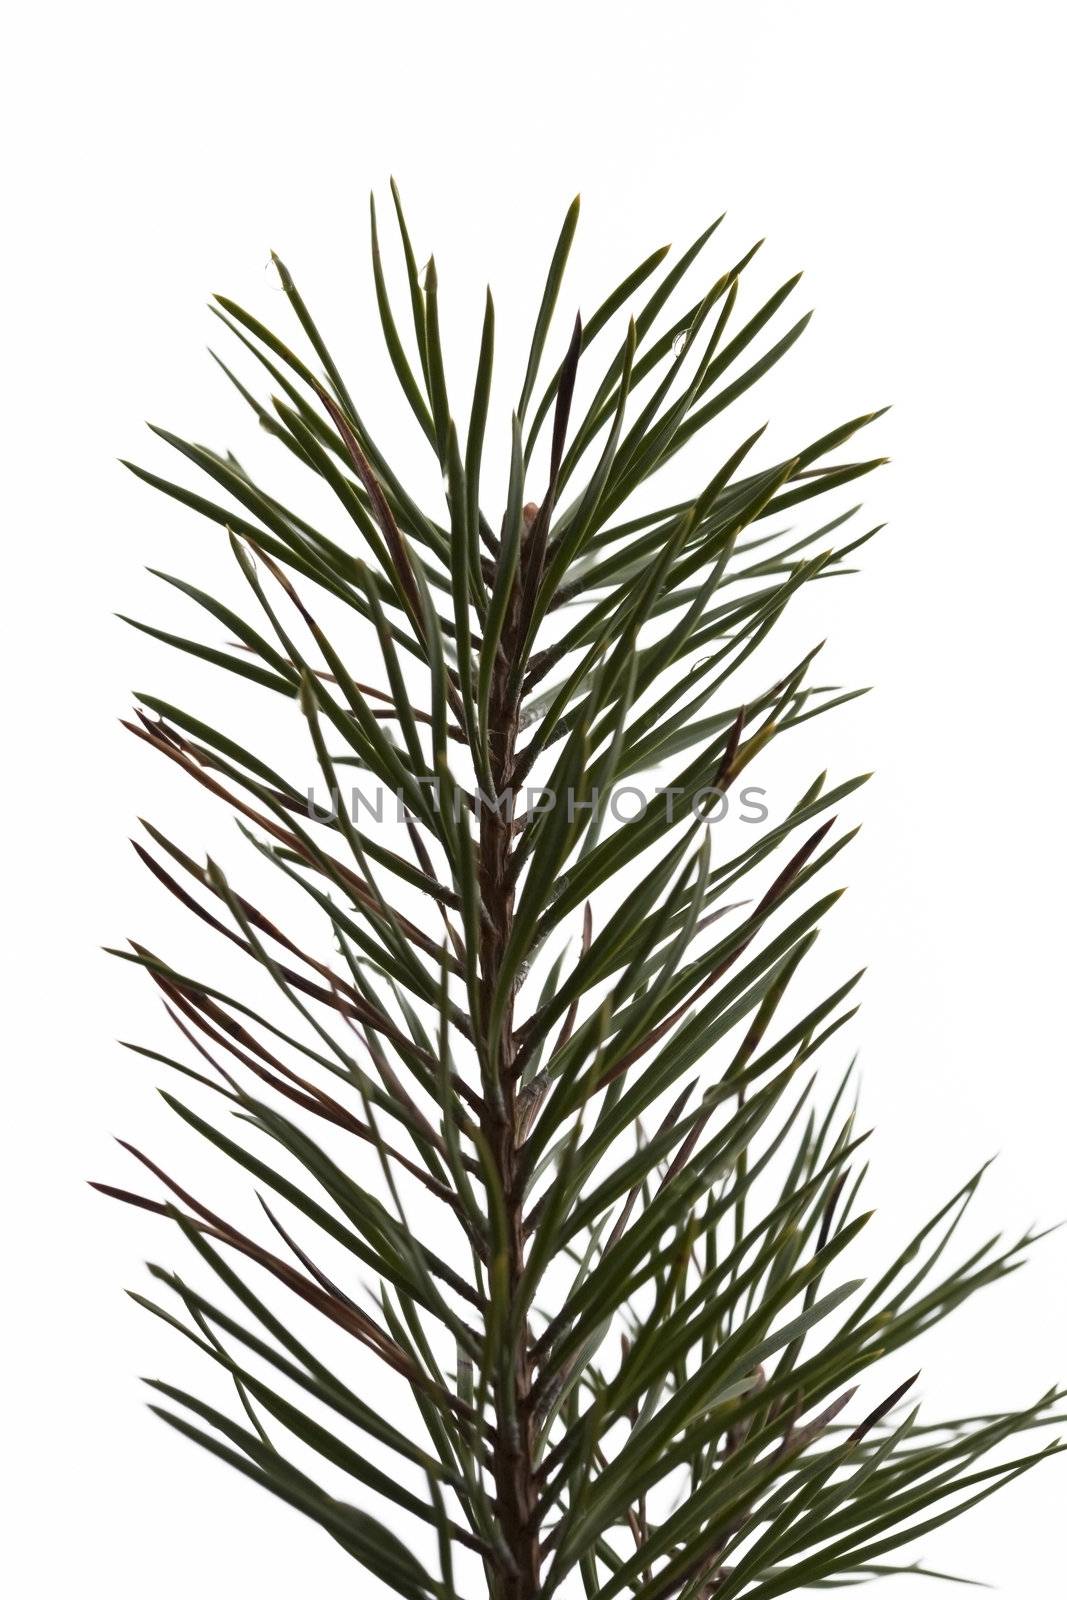 Pine branch on a white background